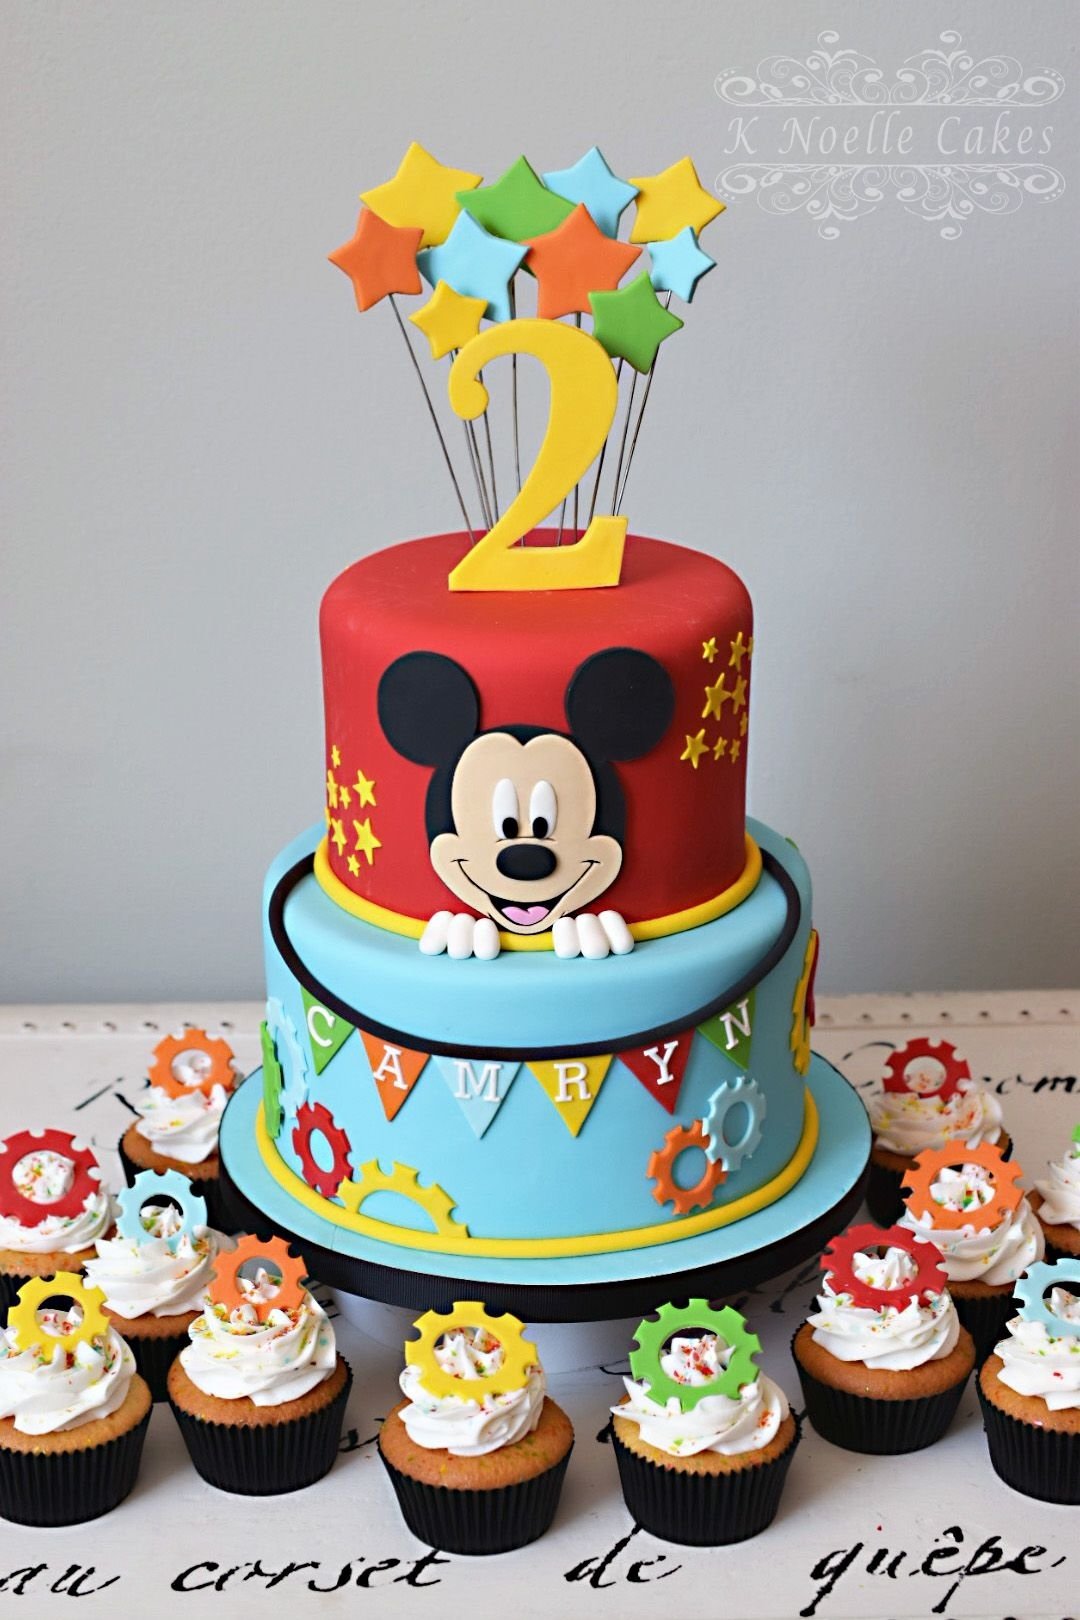 10 Ideal Mickey Mouse Clubhouse Cakes Ideas mickey mouse clubhouse theme cakek noelle cakes cakes by k 3 2022